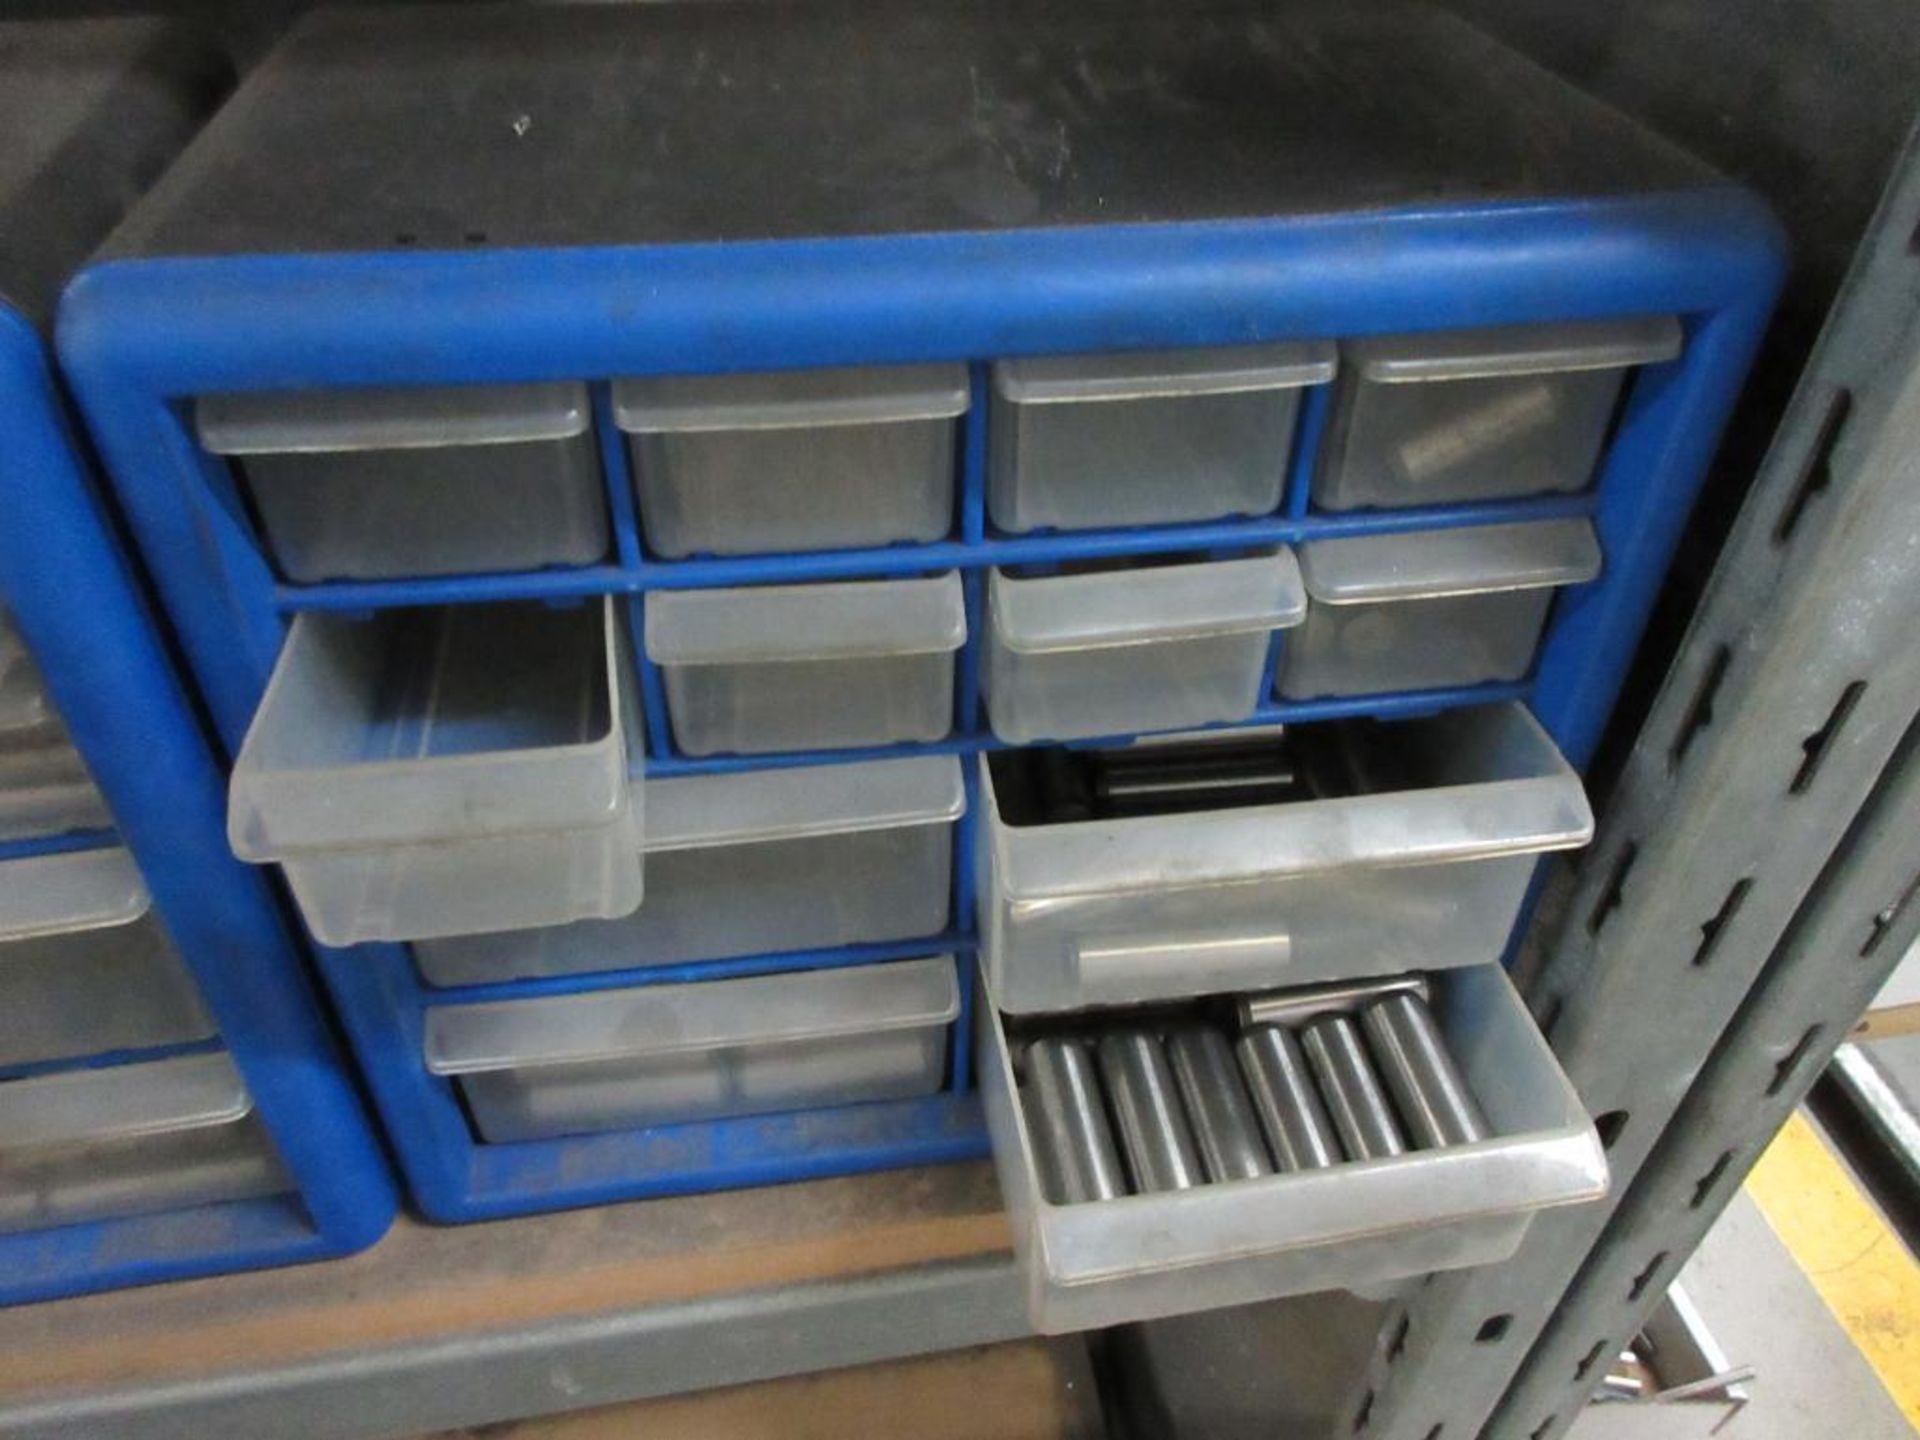 6 BOXES ASSORTED DEMOUNTABLE GUIDE PINS, 5 TOOL DRAWER BINS W/ GUIDE PINS - Image 11 of 11